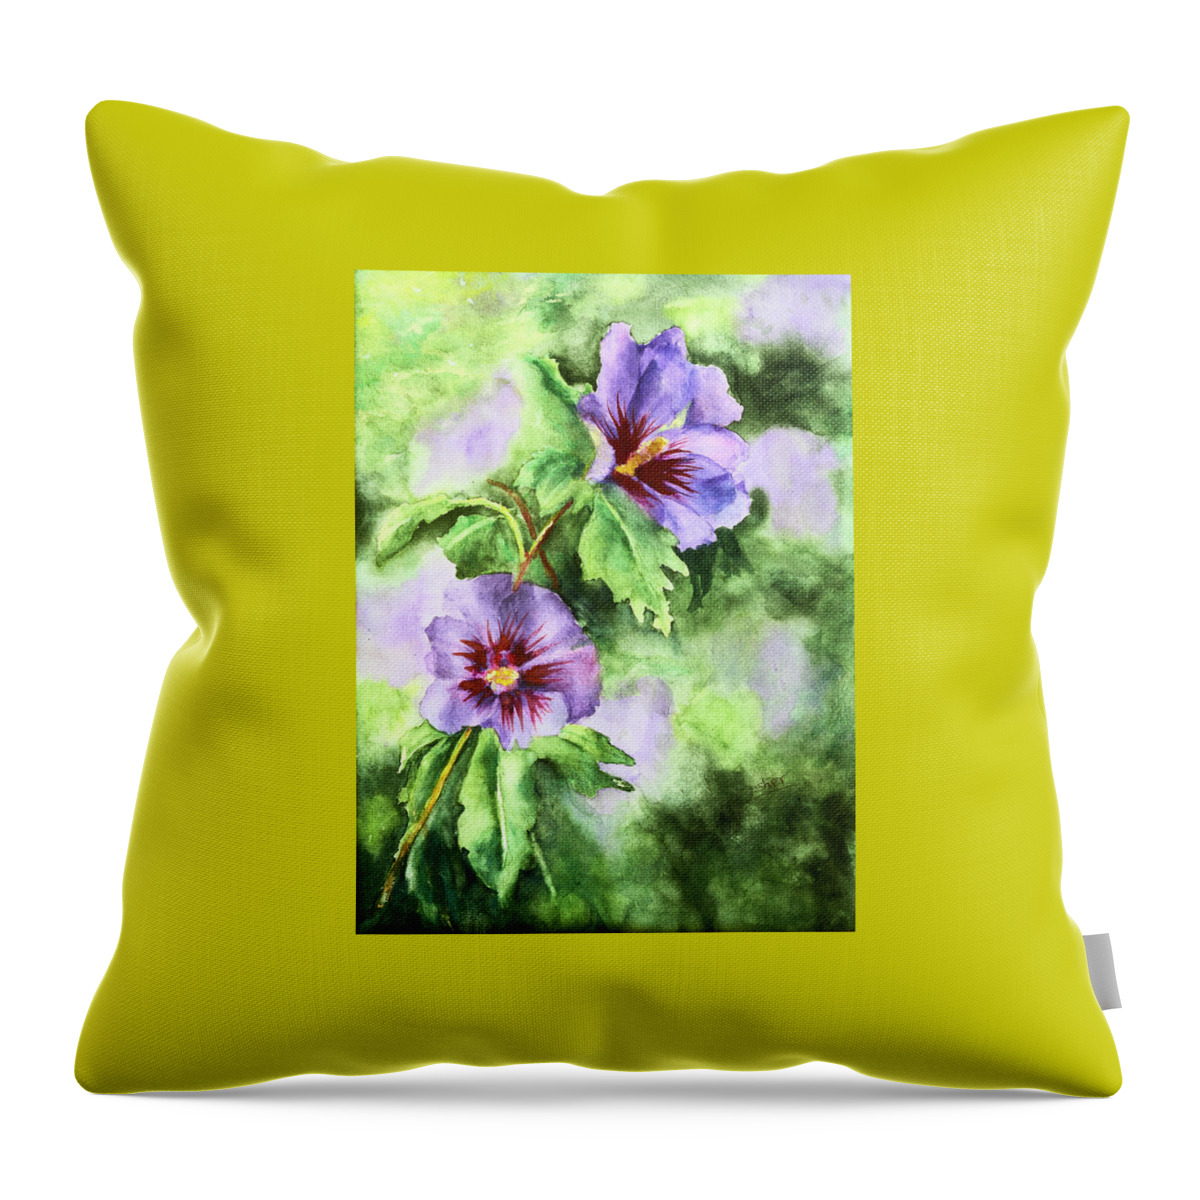 Art - Watercolor Throw Pillow featuring the painting Summer Glory Watercolour on Paper by Sher Nasser